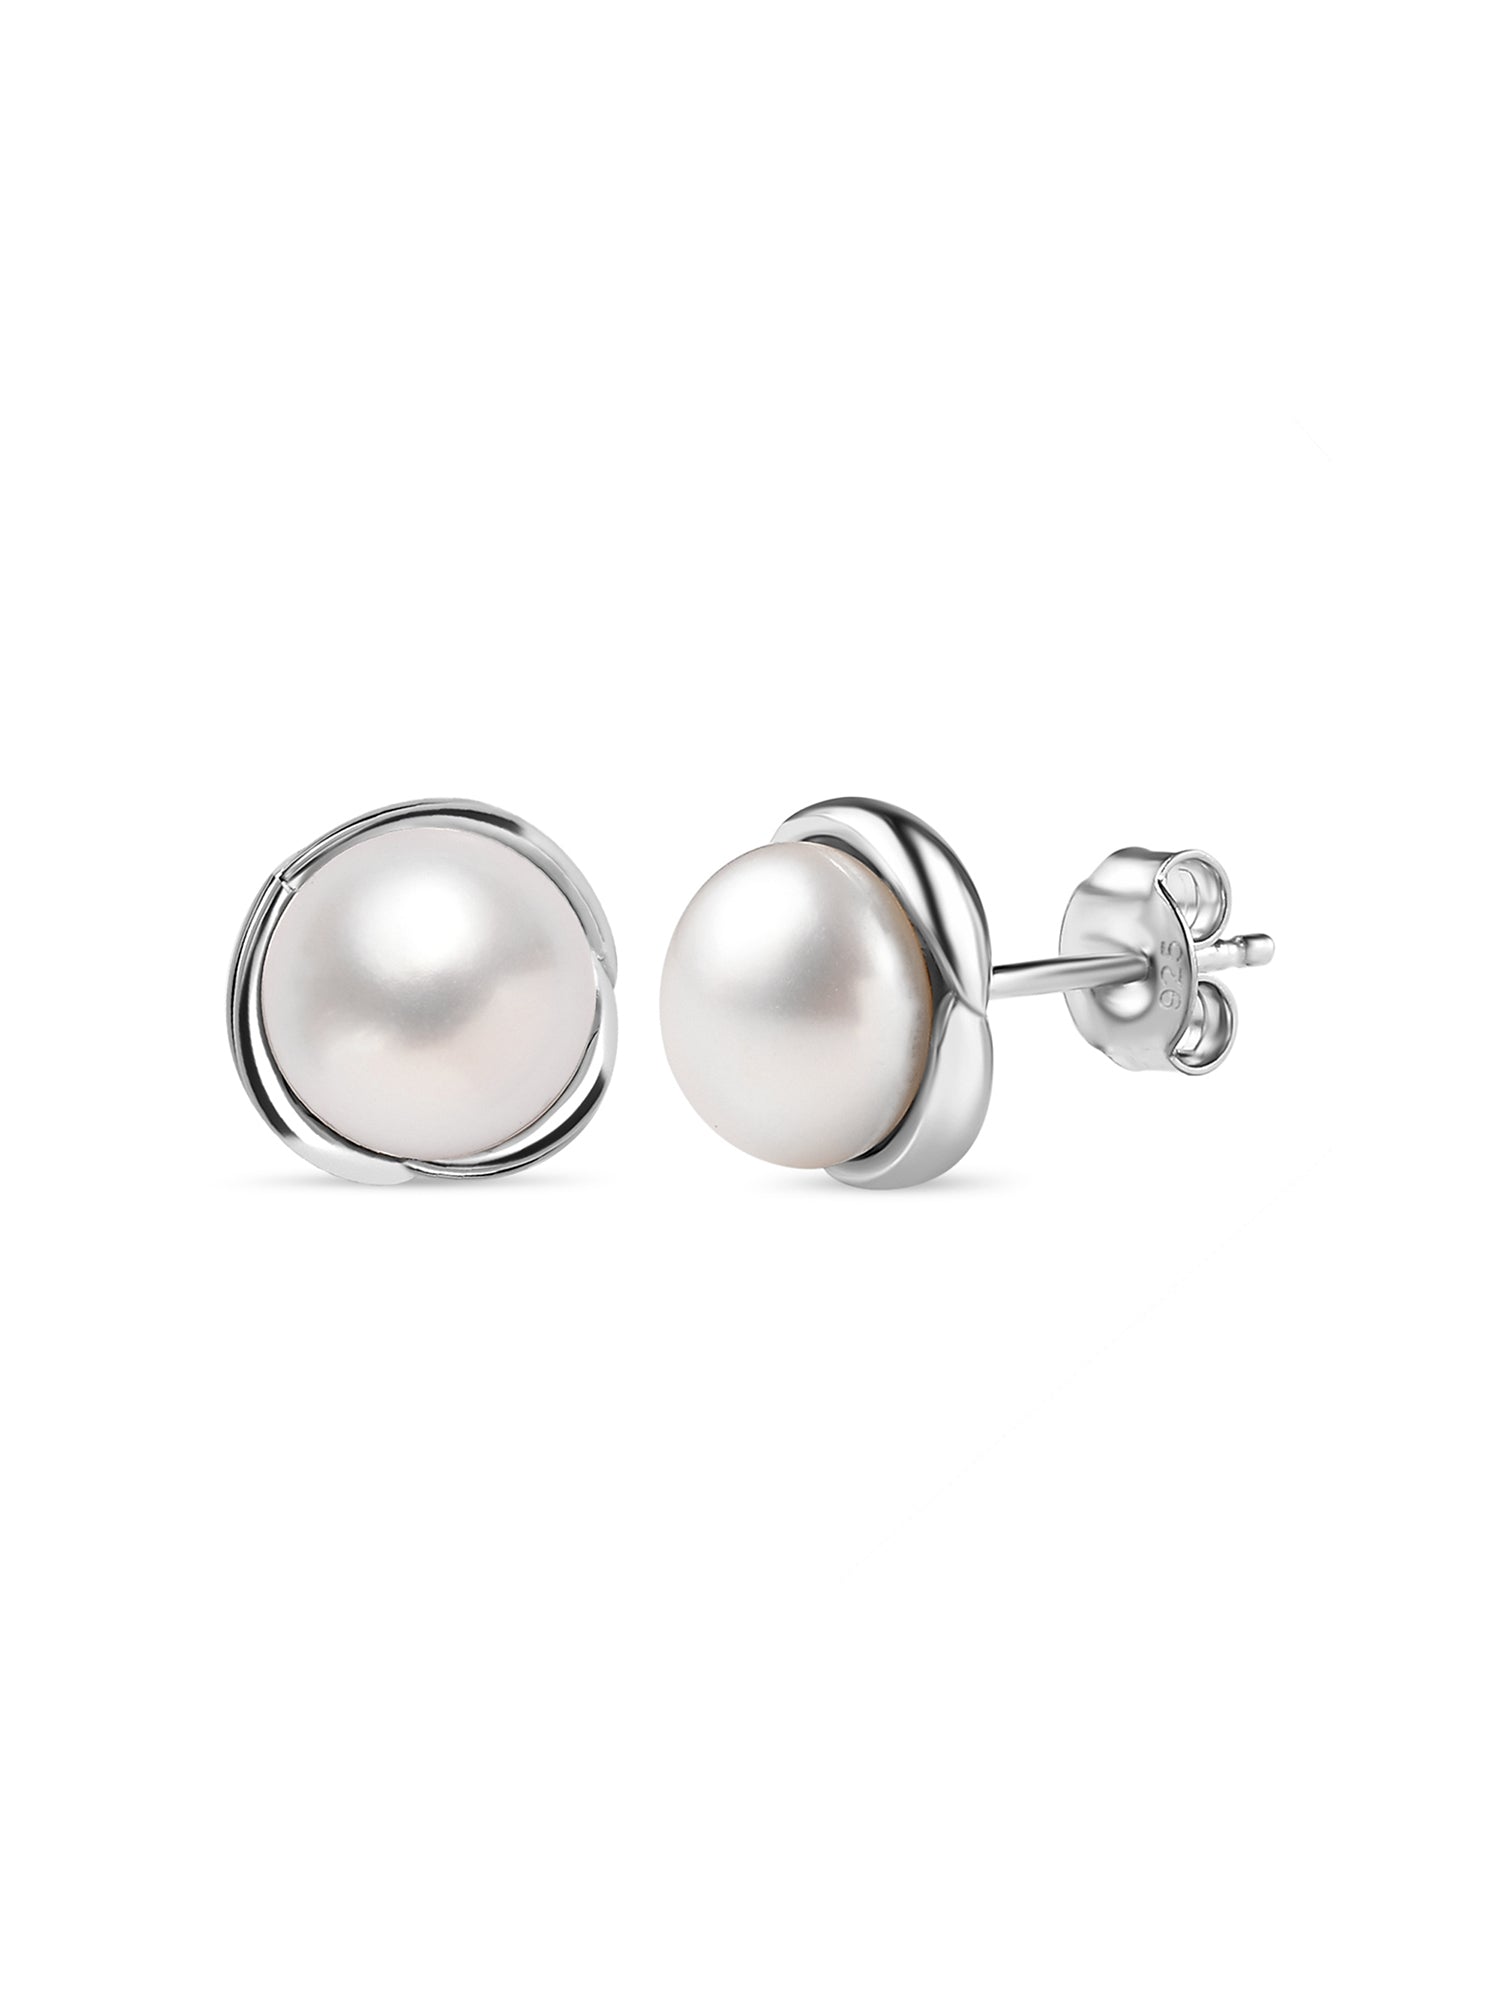 Real Pearl Daily Wear Flower Studs In 925 Silver-1